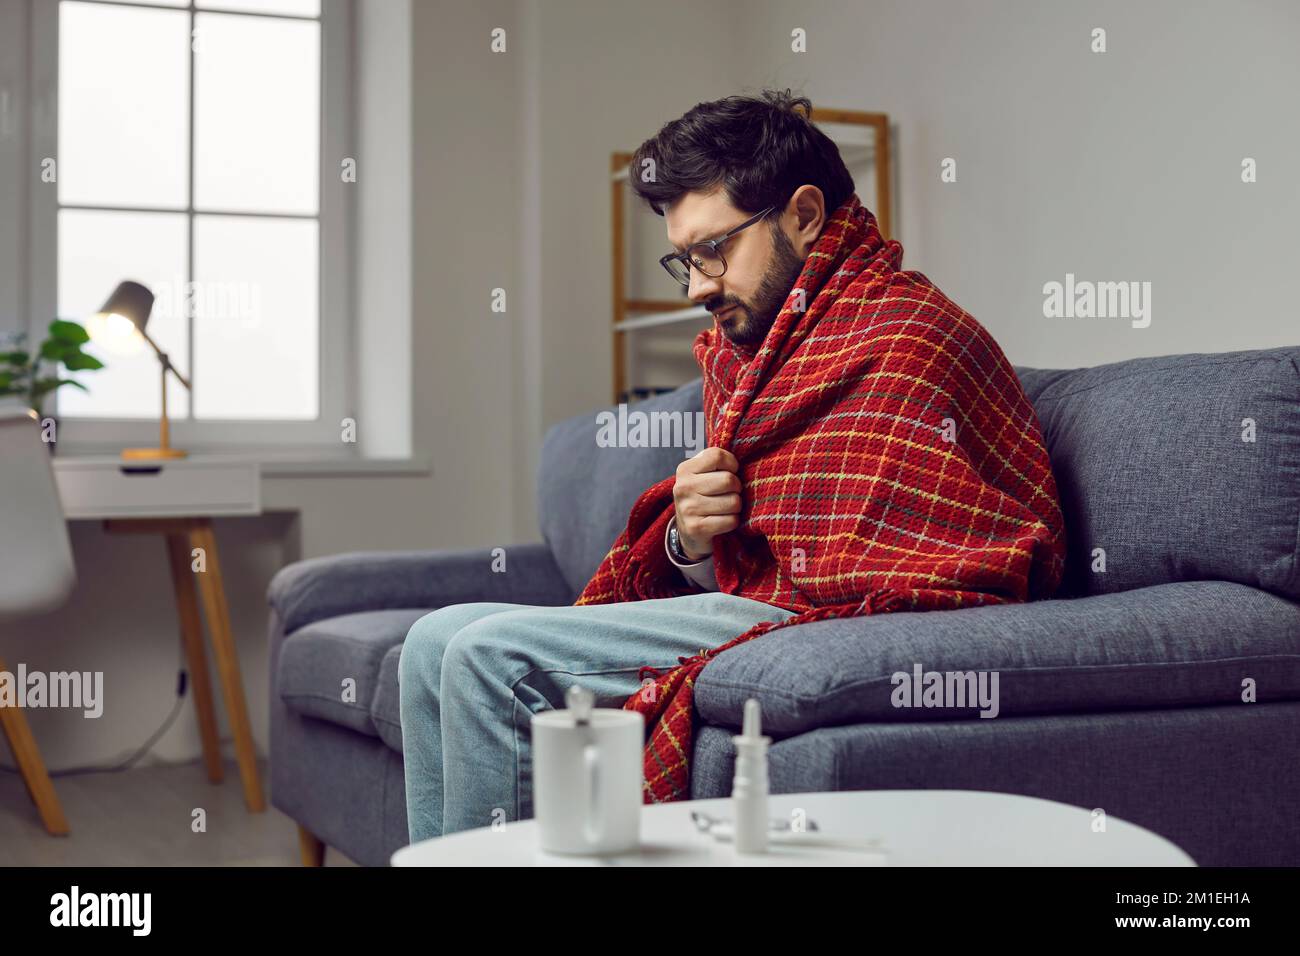 Sick young man in a blanket sitting on the sofa at home, feeling cold and shivering Stock Photo